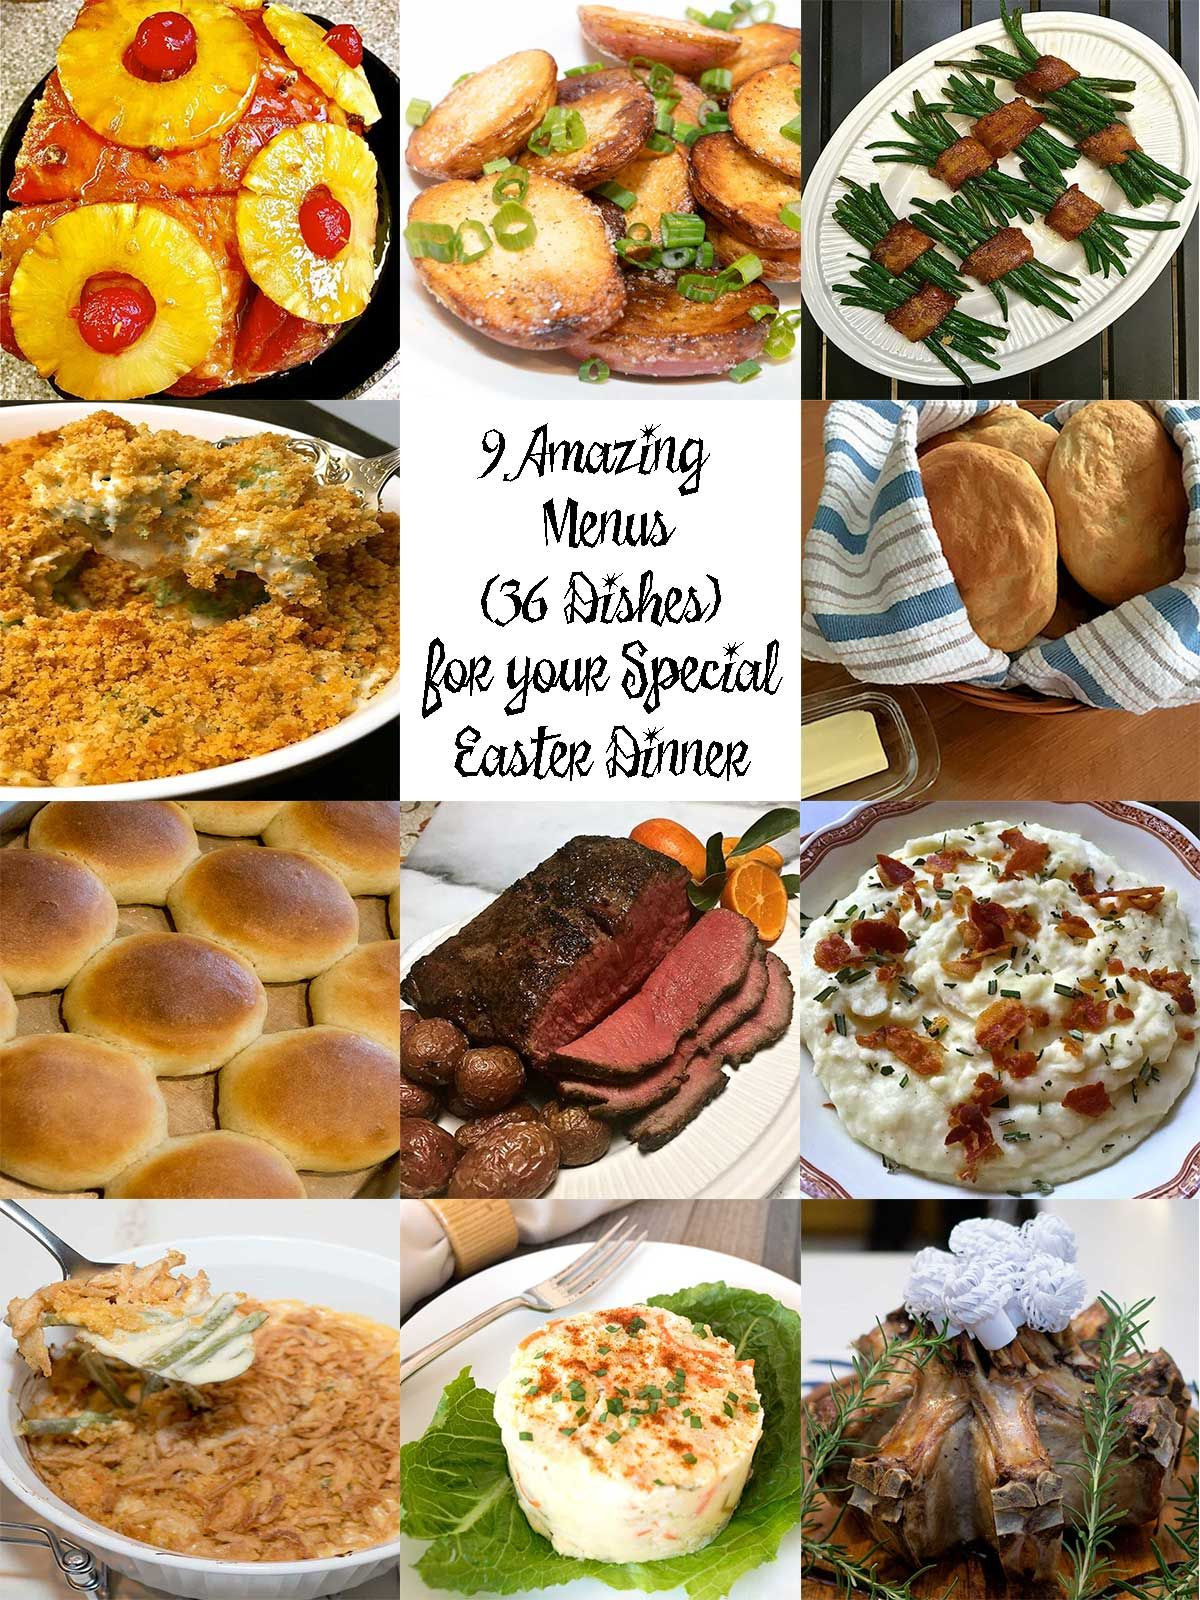 Easy Easter Dinner Menu
 everyday recipes from simple to sophisticated